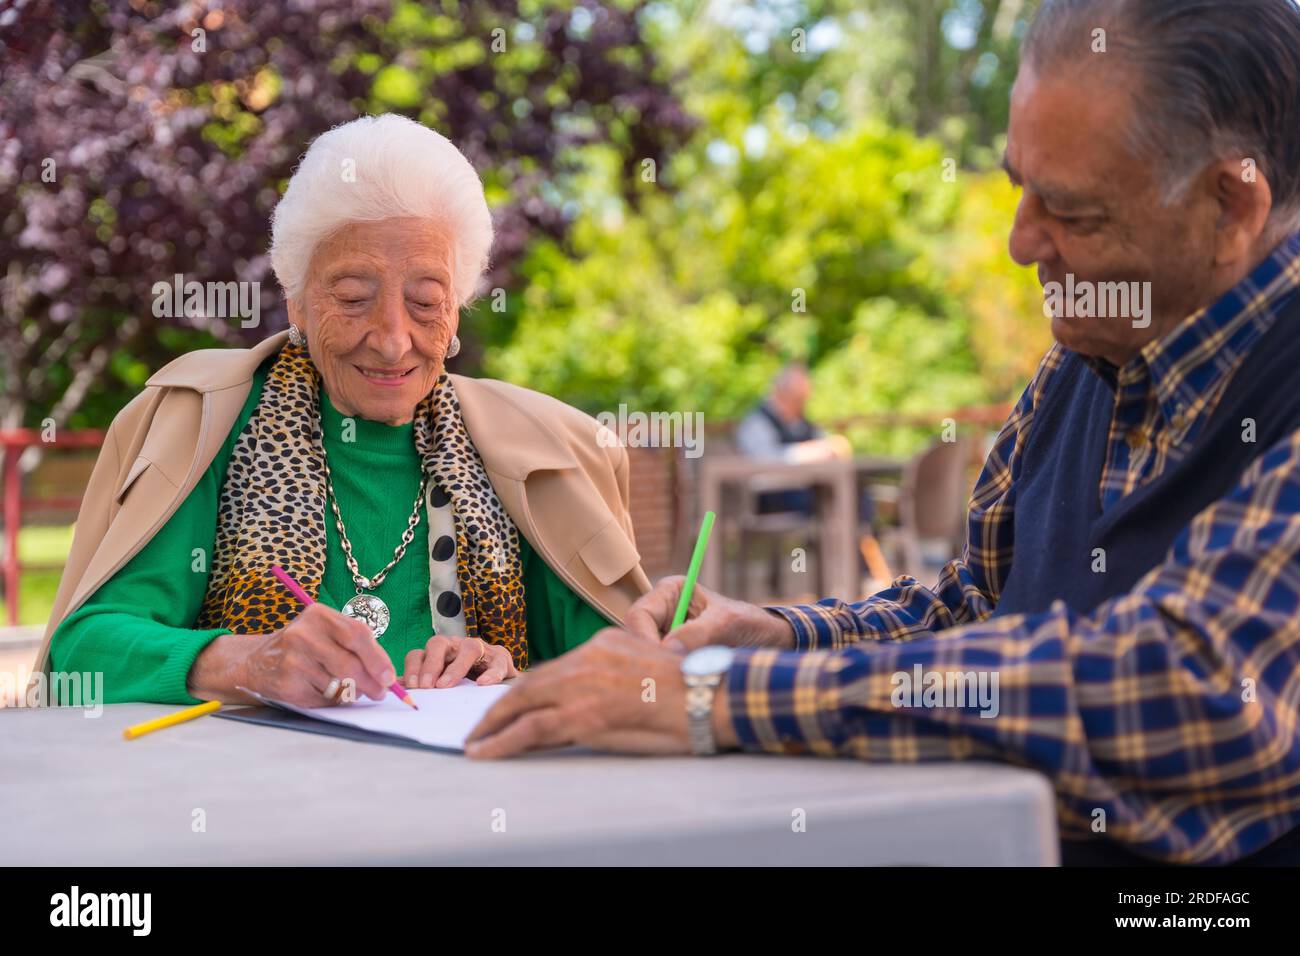 Two elderly people painting in the garden of a nursing home or retirement home Stock Photo